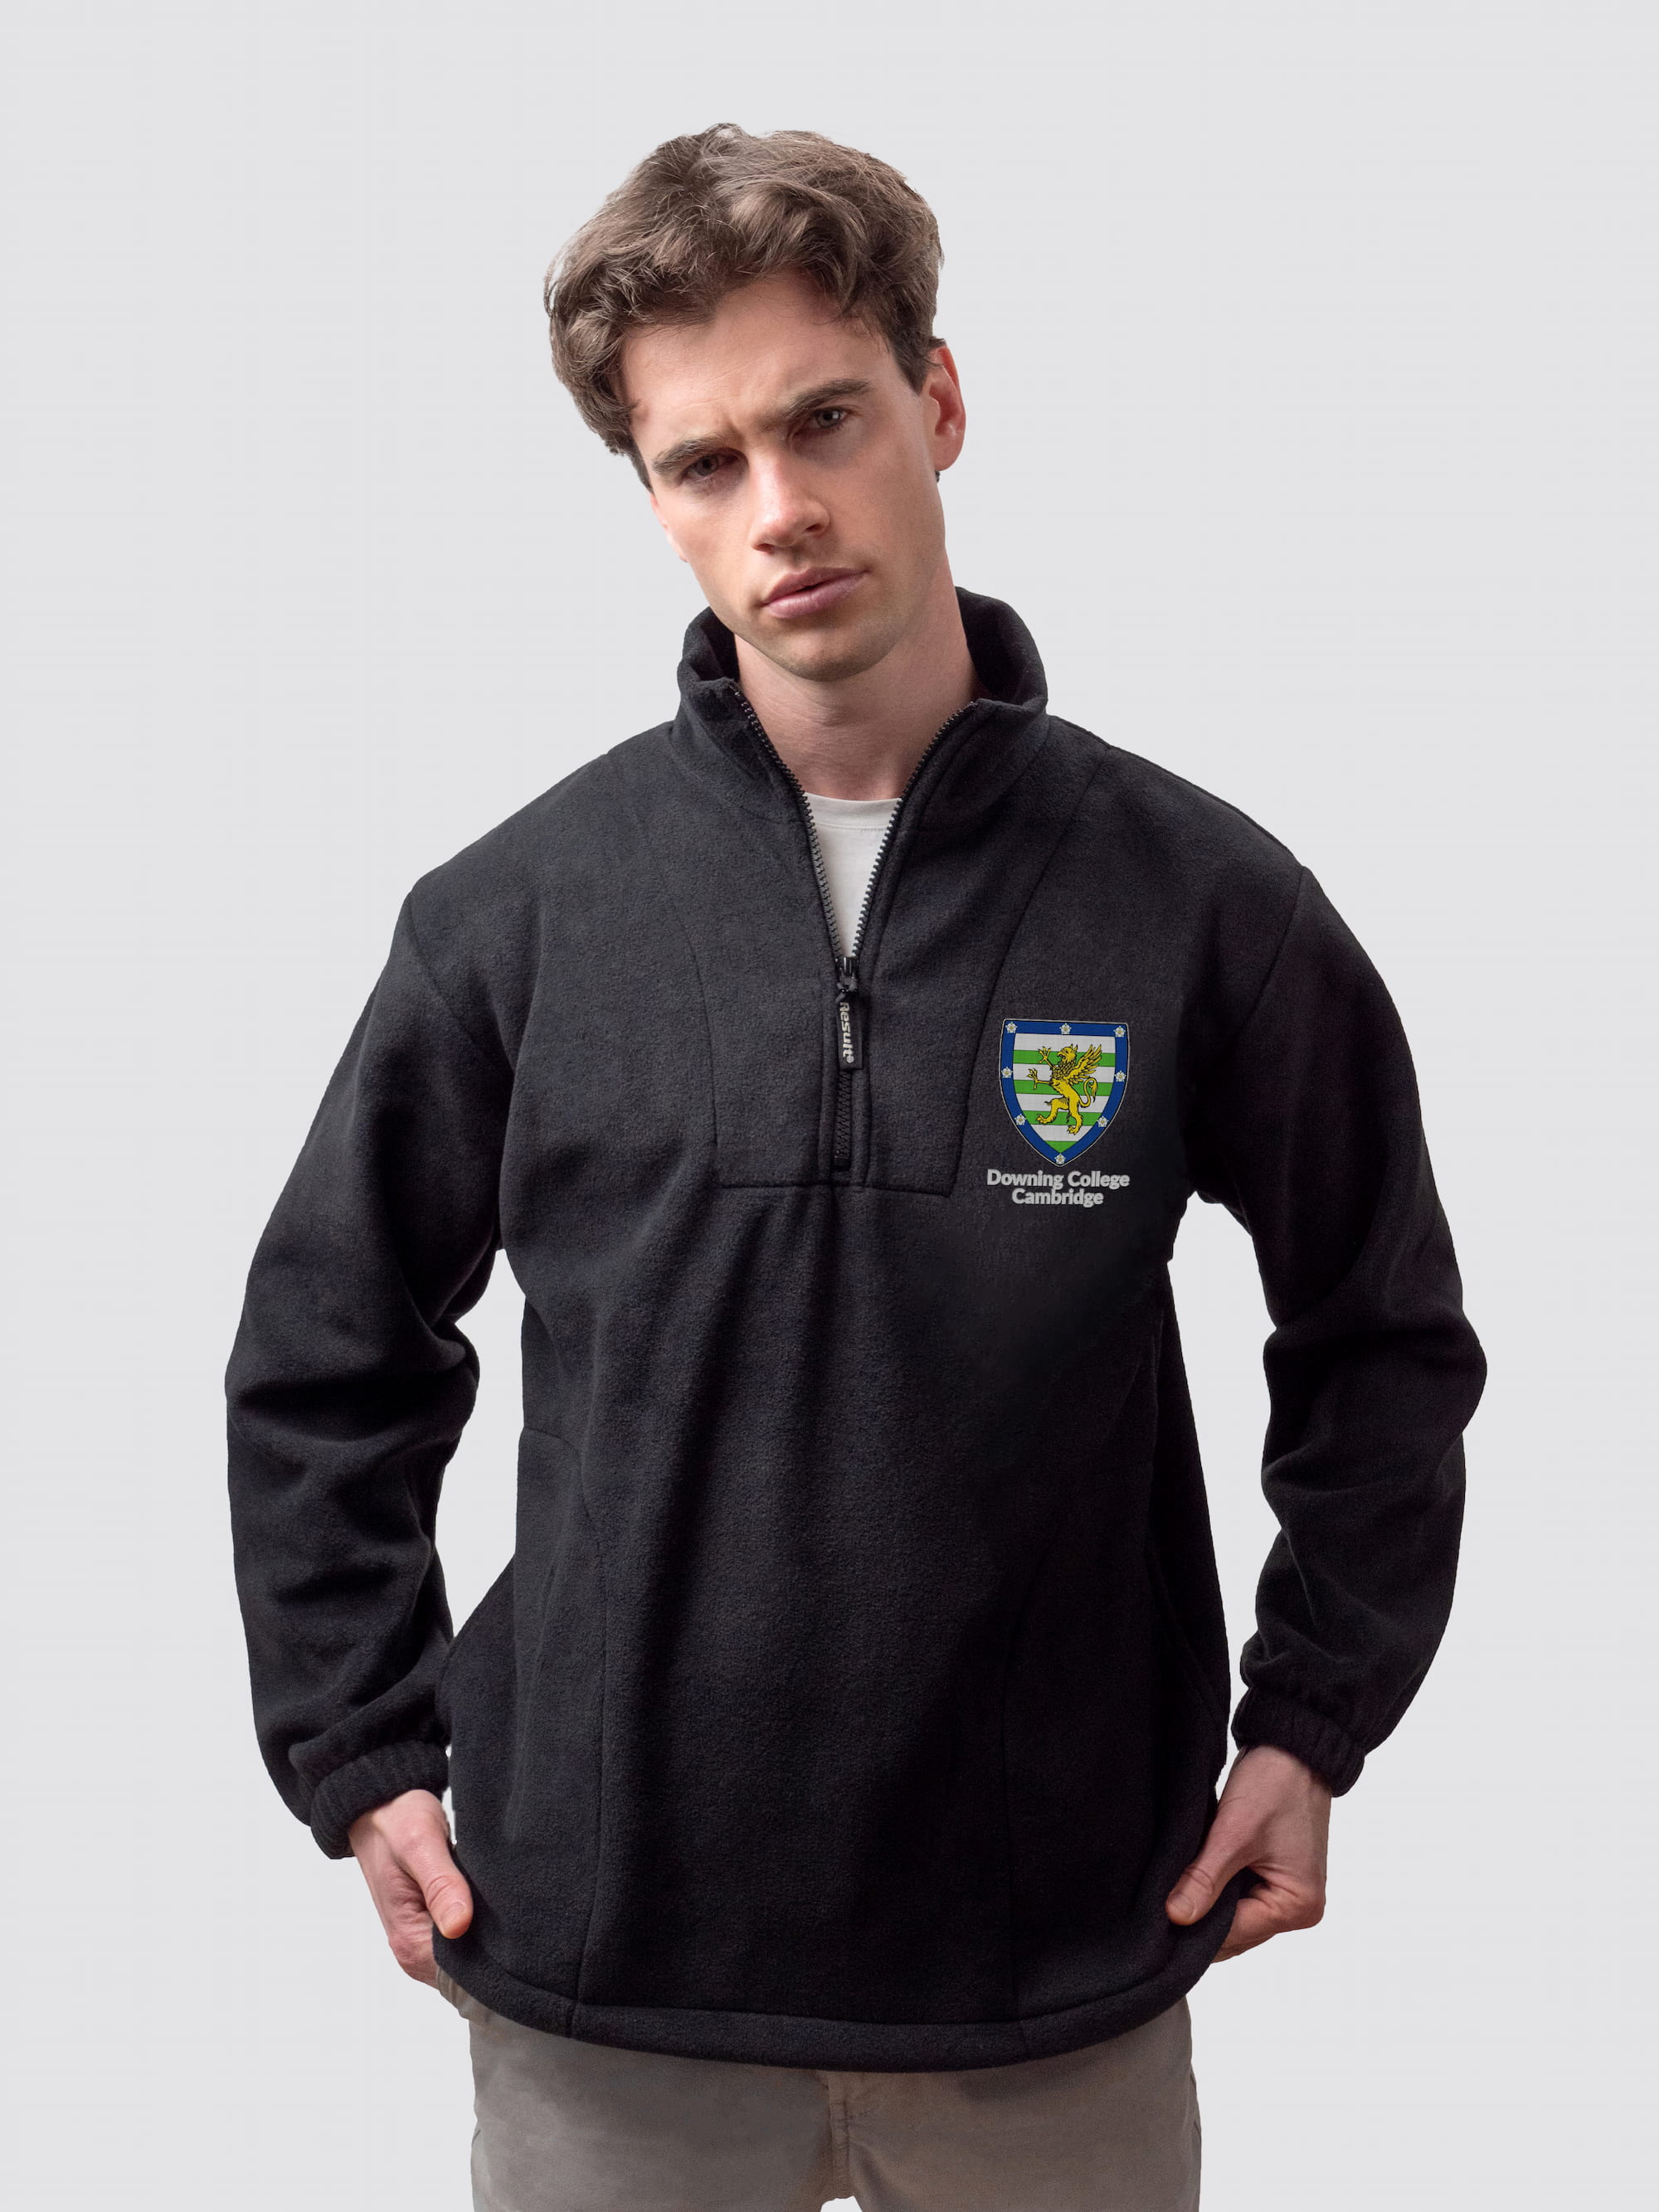 Cambridge University fleece, with custom embroidered initials and Downing crest